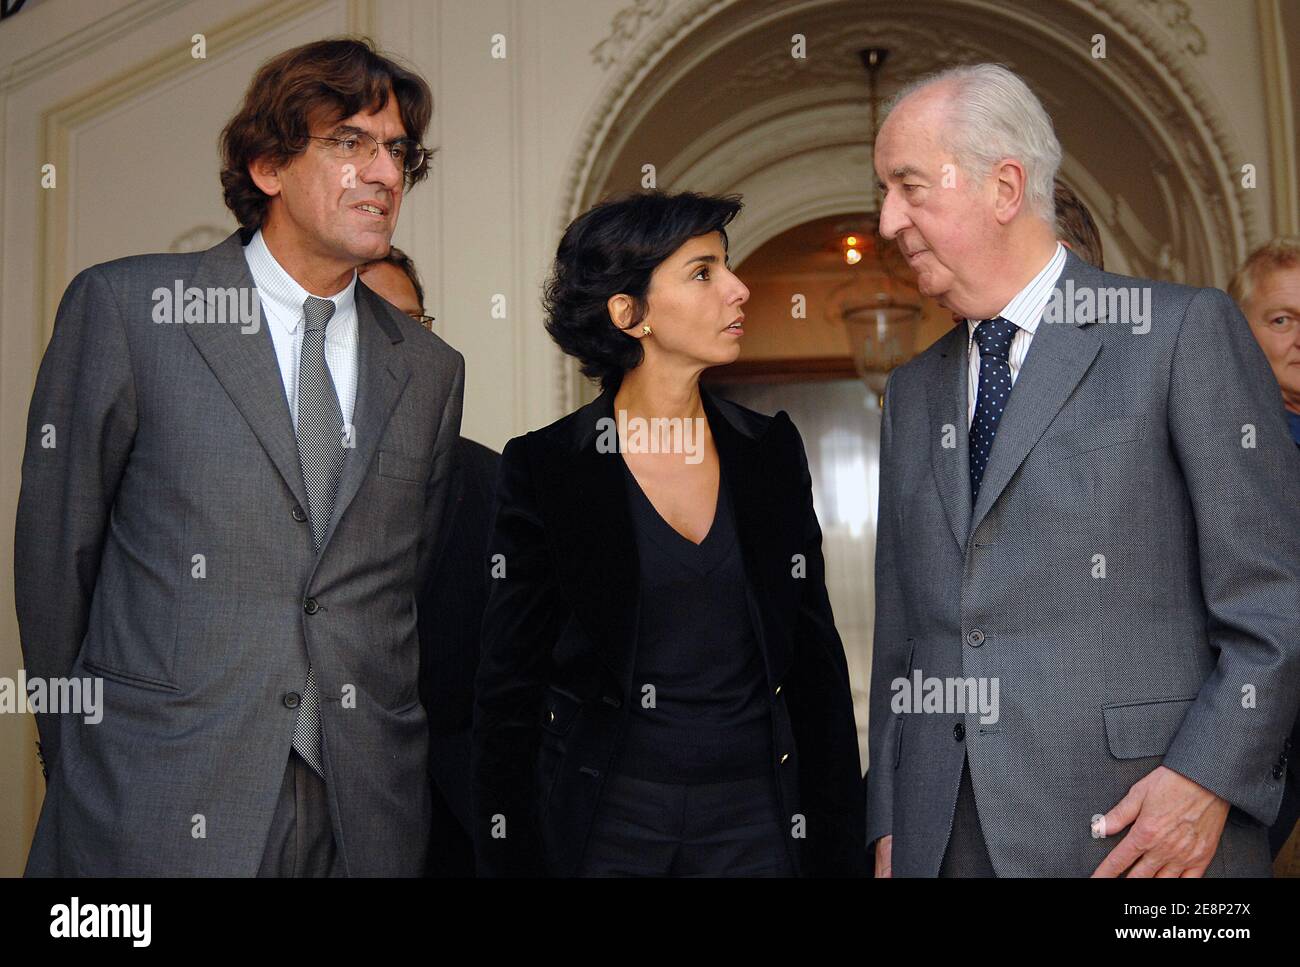 French justice minister Rachida Dati greets former Prime Minister Edouard Balladur (R) and former Education minister Luc Ferry (L) at the end of a lunch with the Committee of reflexion on the modernization and the rebalancing of the institutions, chaired by former Prime Minister Edouard Balladur, in Paris, France, on september 12, 2007. Photo by Christophe Guibbaud/ABACAPRESS.COM Stock Photo